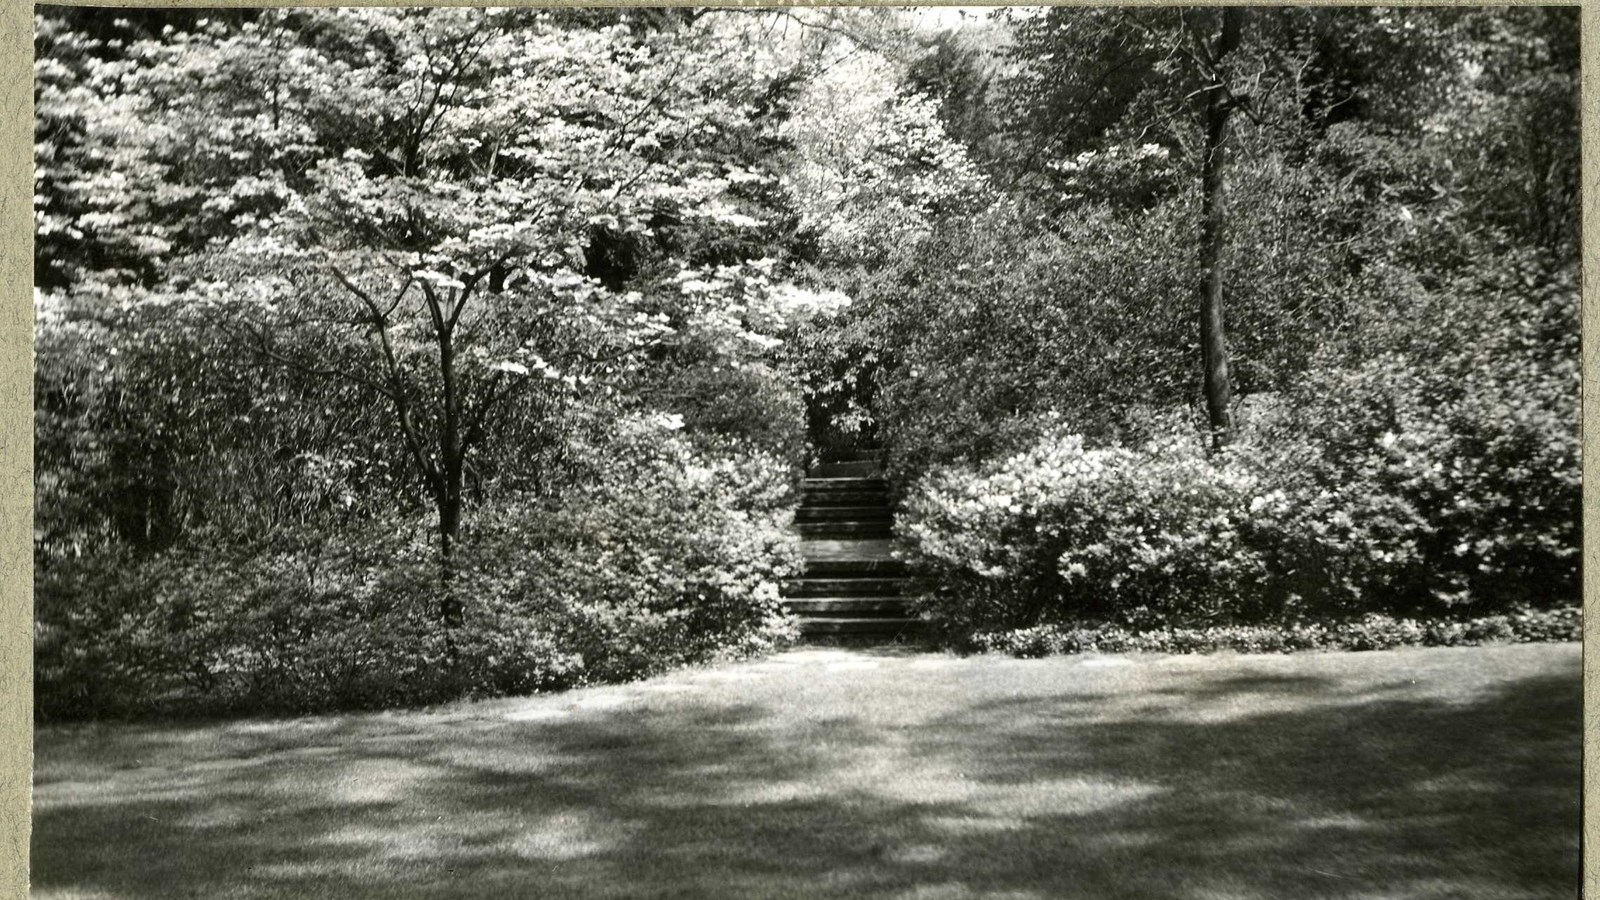 Black and white of flat grassy area with shrubs and trees on edge with stone stairs cutting through